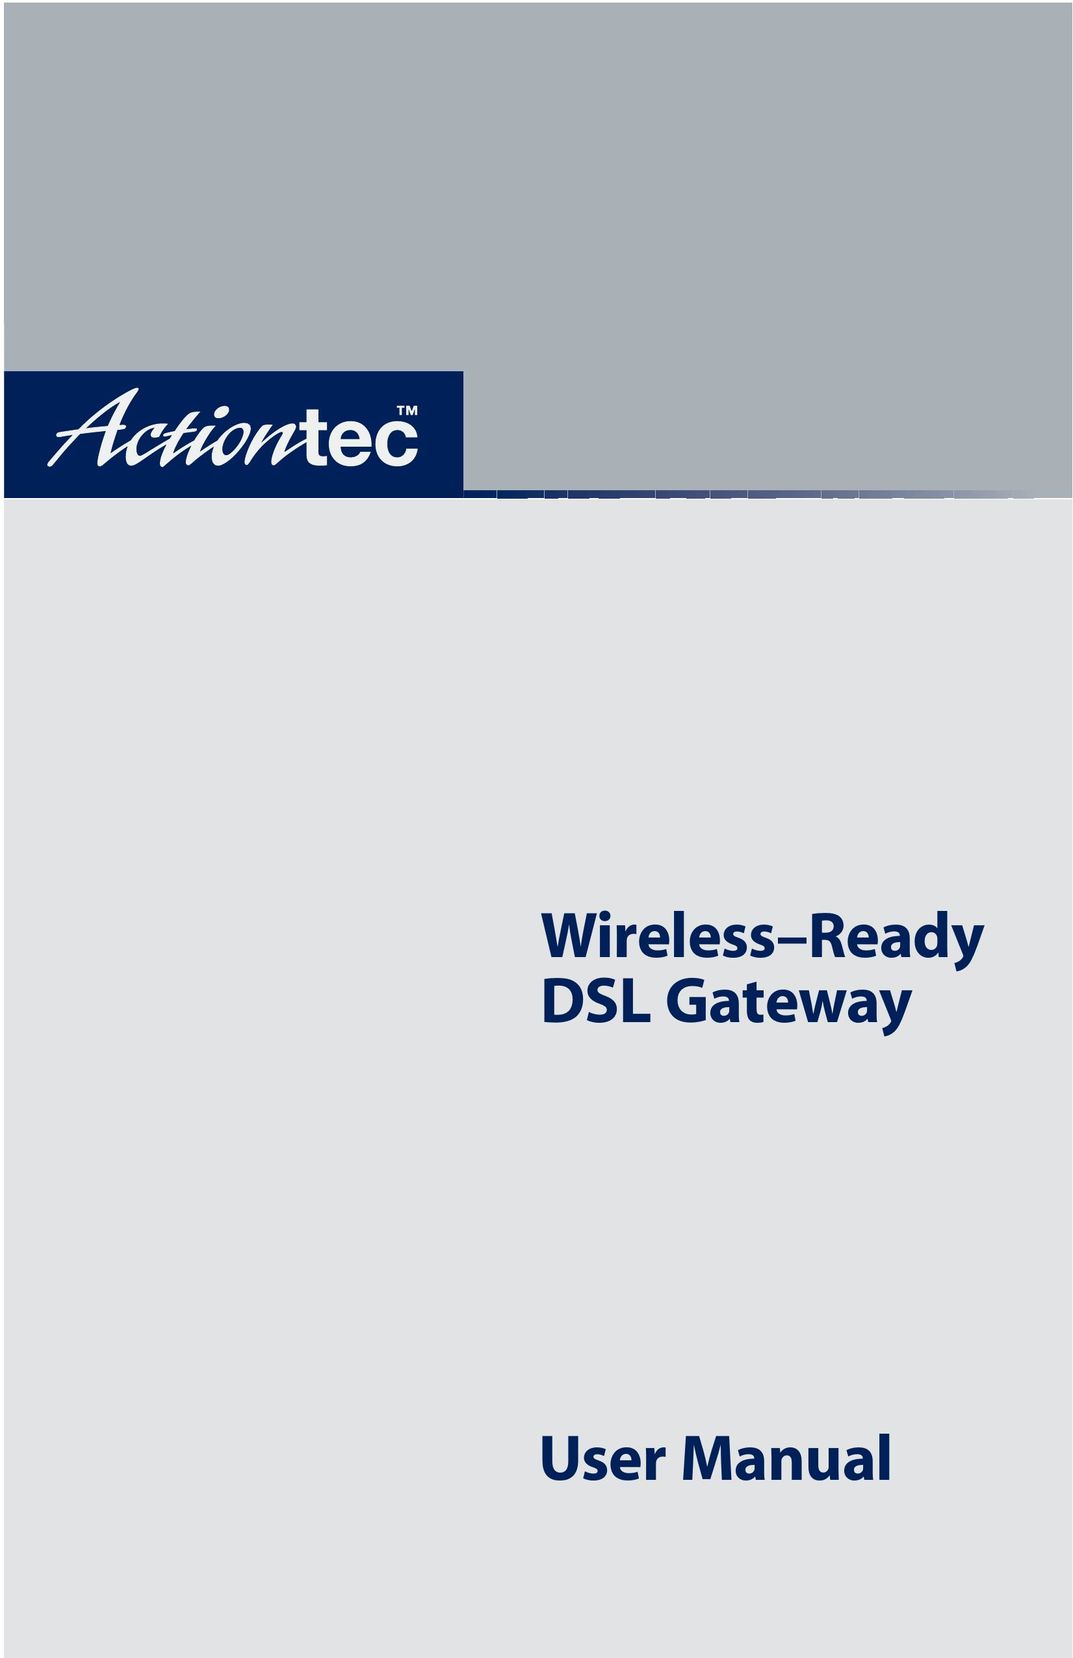 Actiontec electronic Wireless-Ready Network Router User Manual